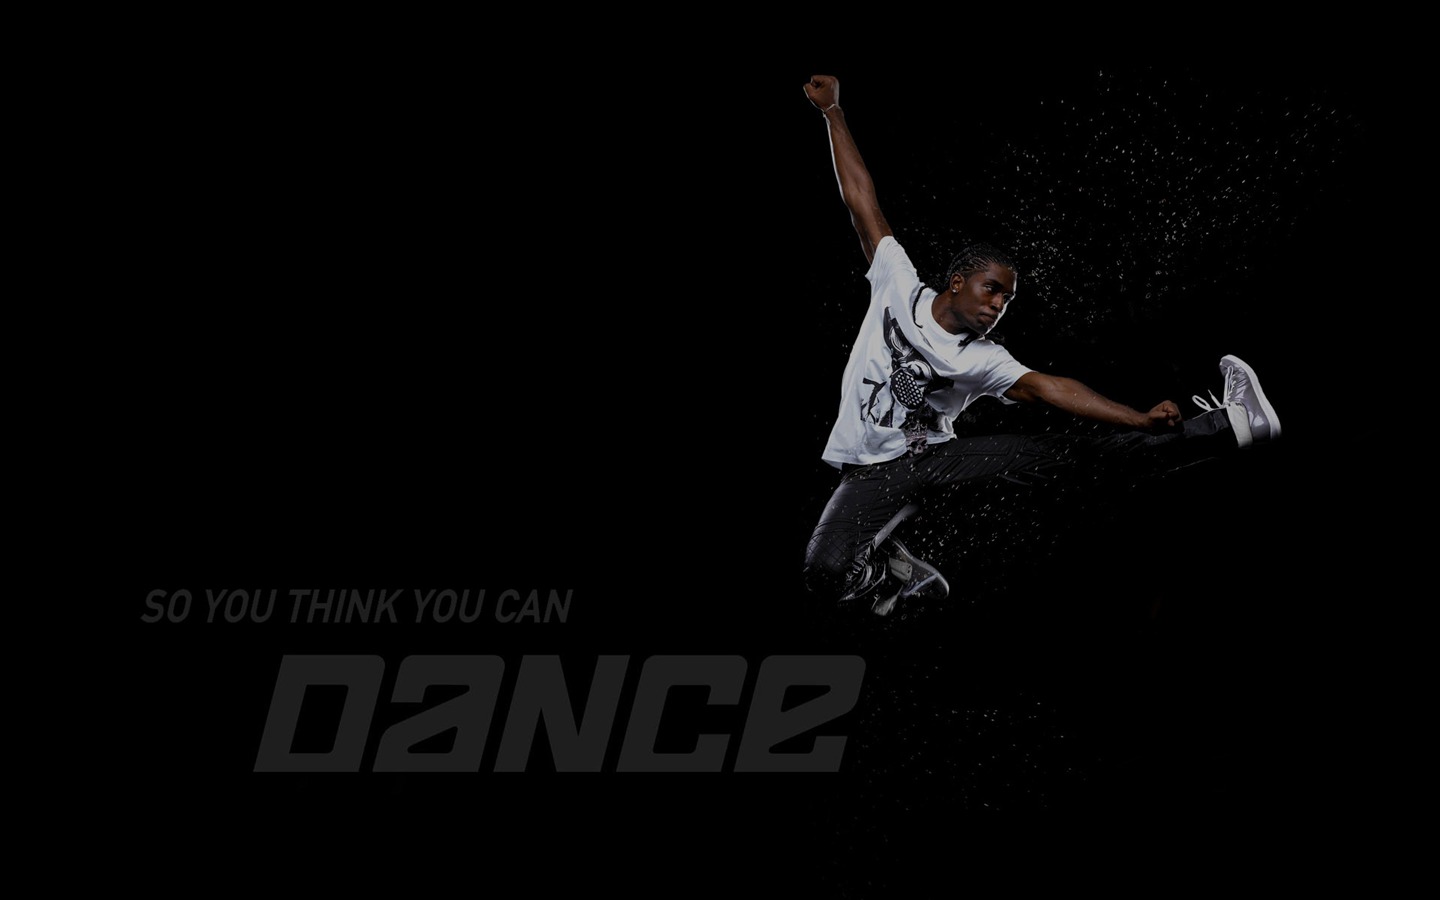 So You Think You Can Dance wallpaper (2) #4 - 1440x900